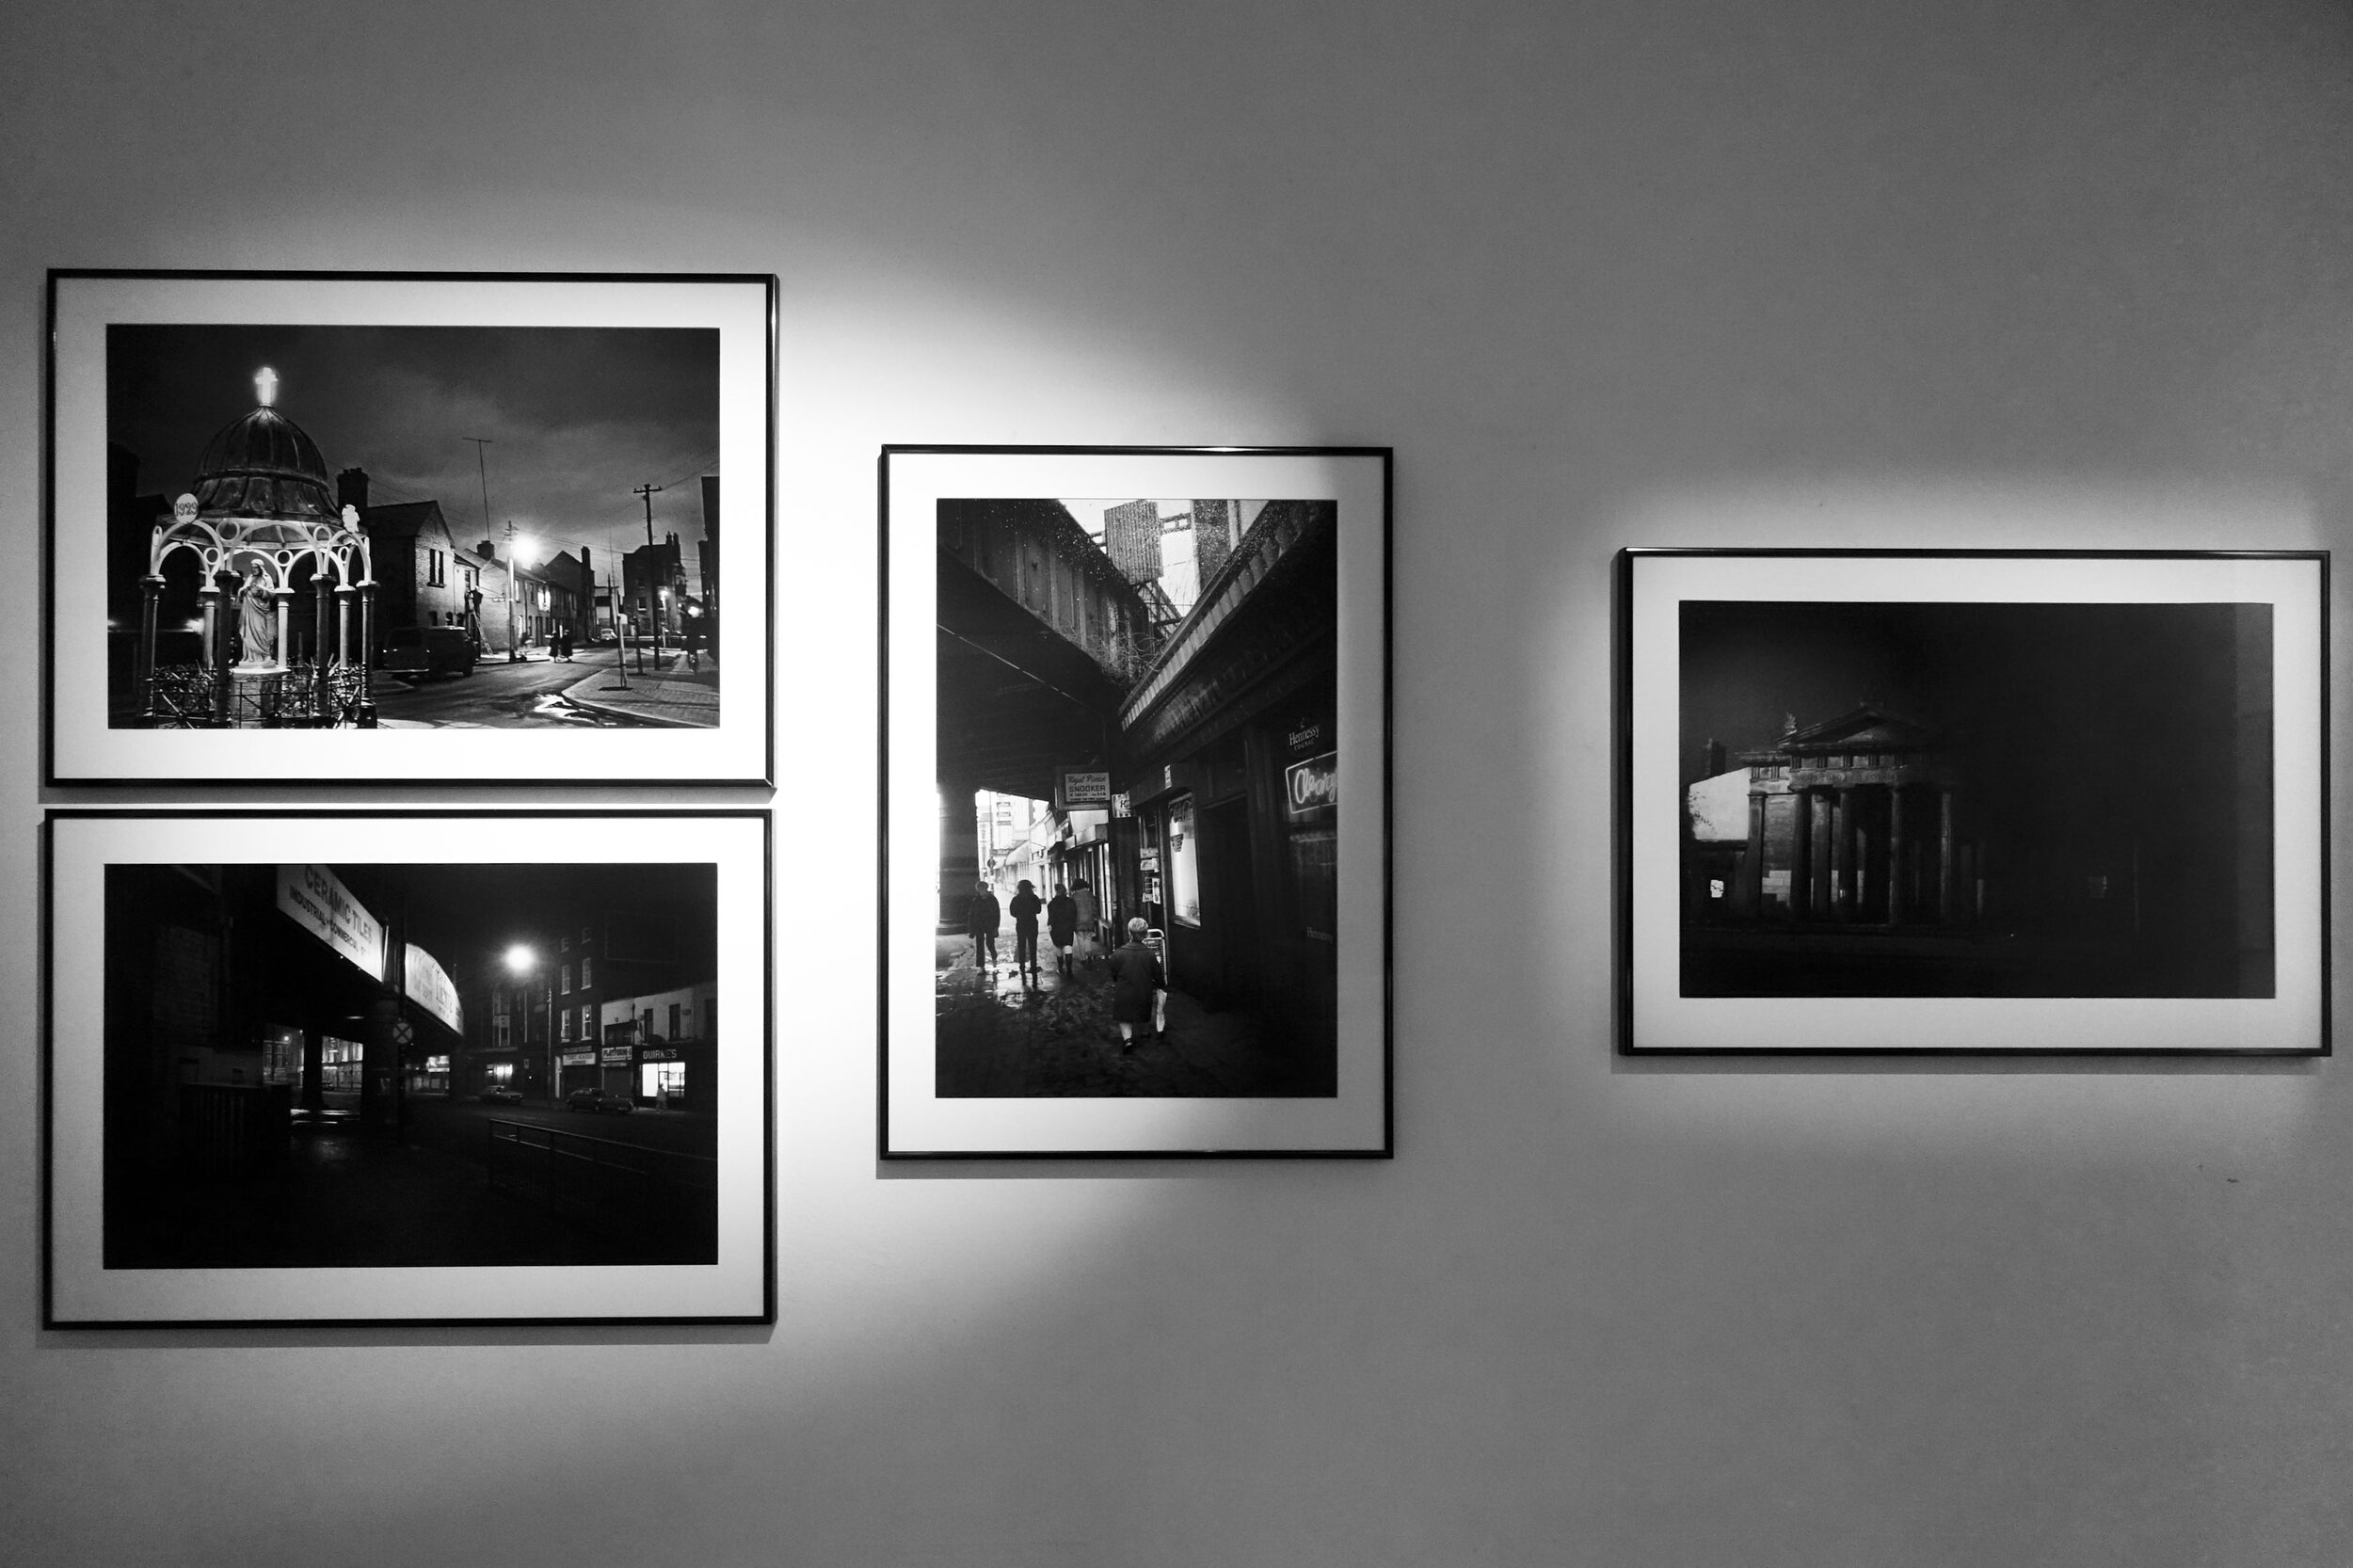  The exhibition in the Gallery of Photography 